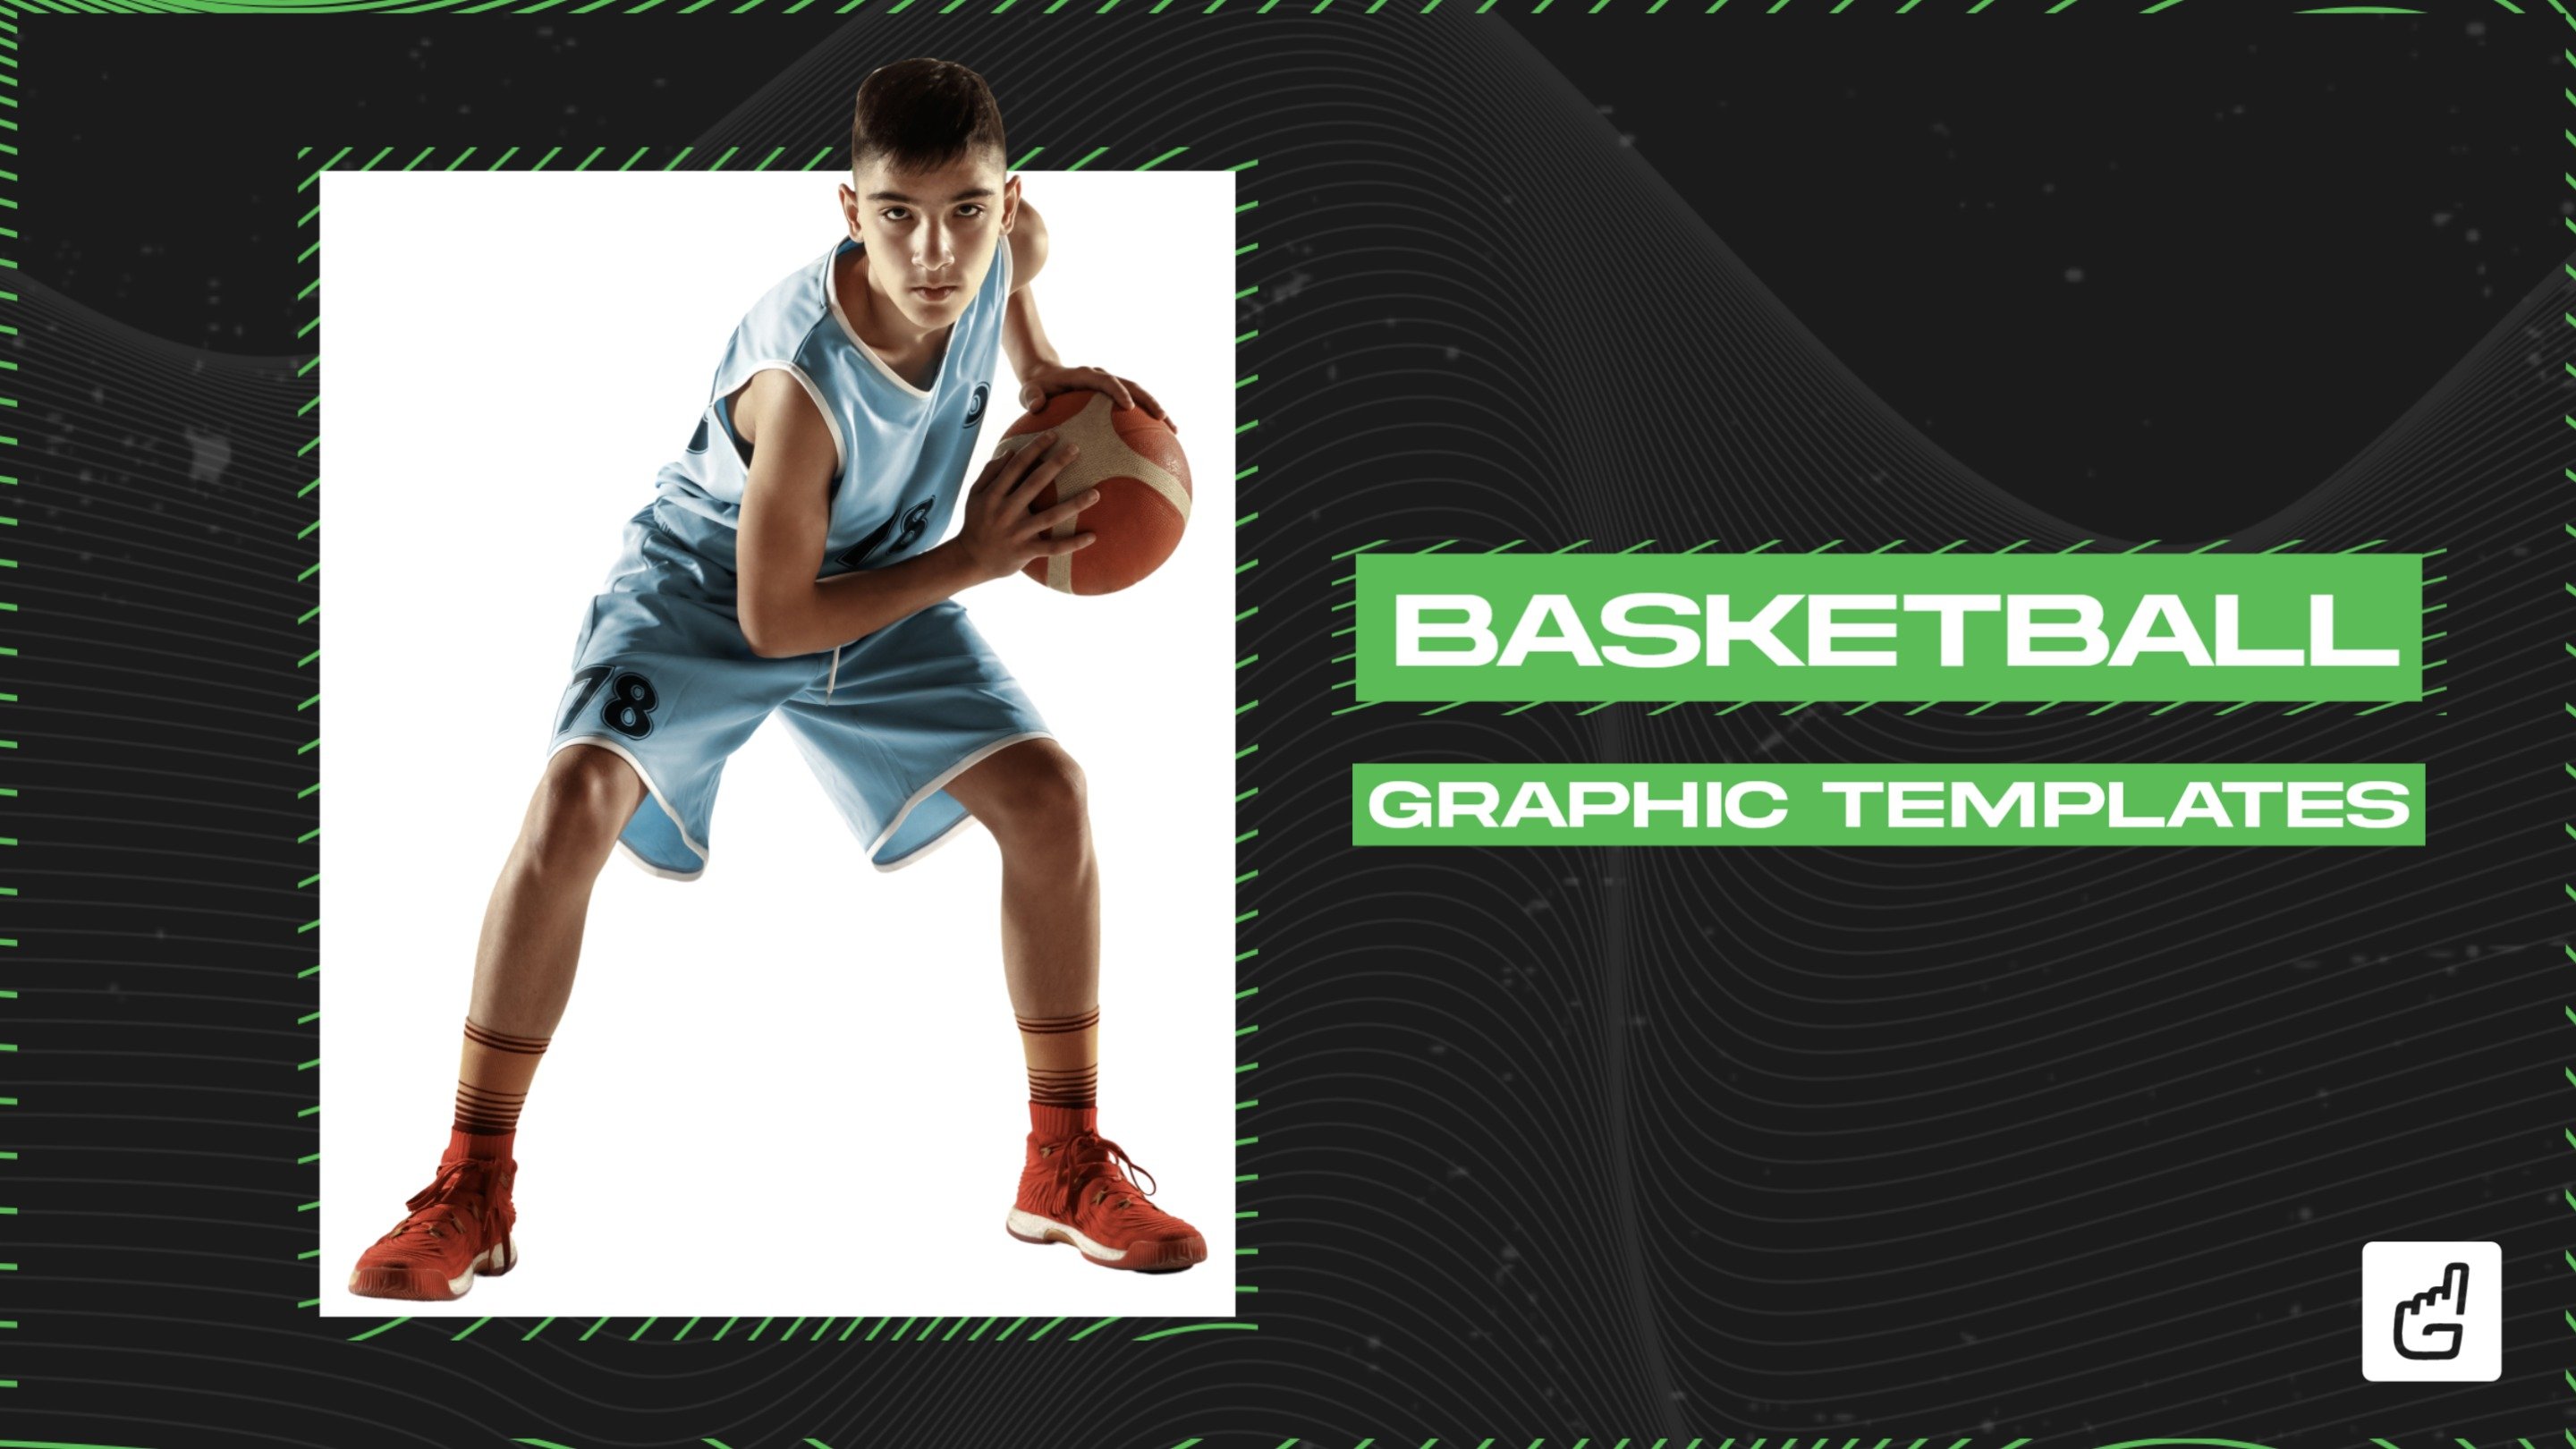 Create Graphics using Professional Basketball Templates Gipper